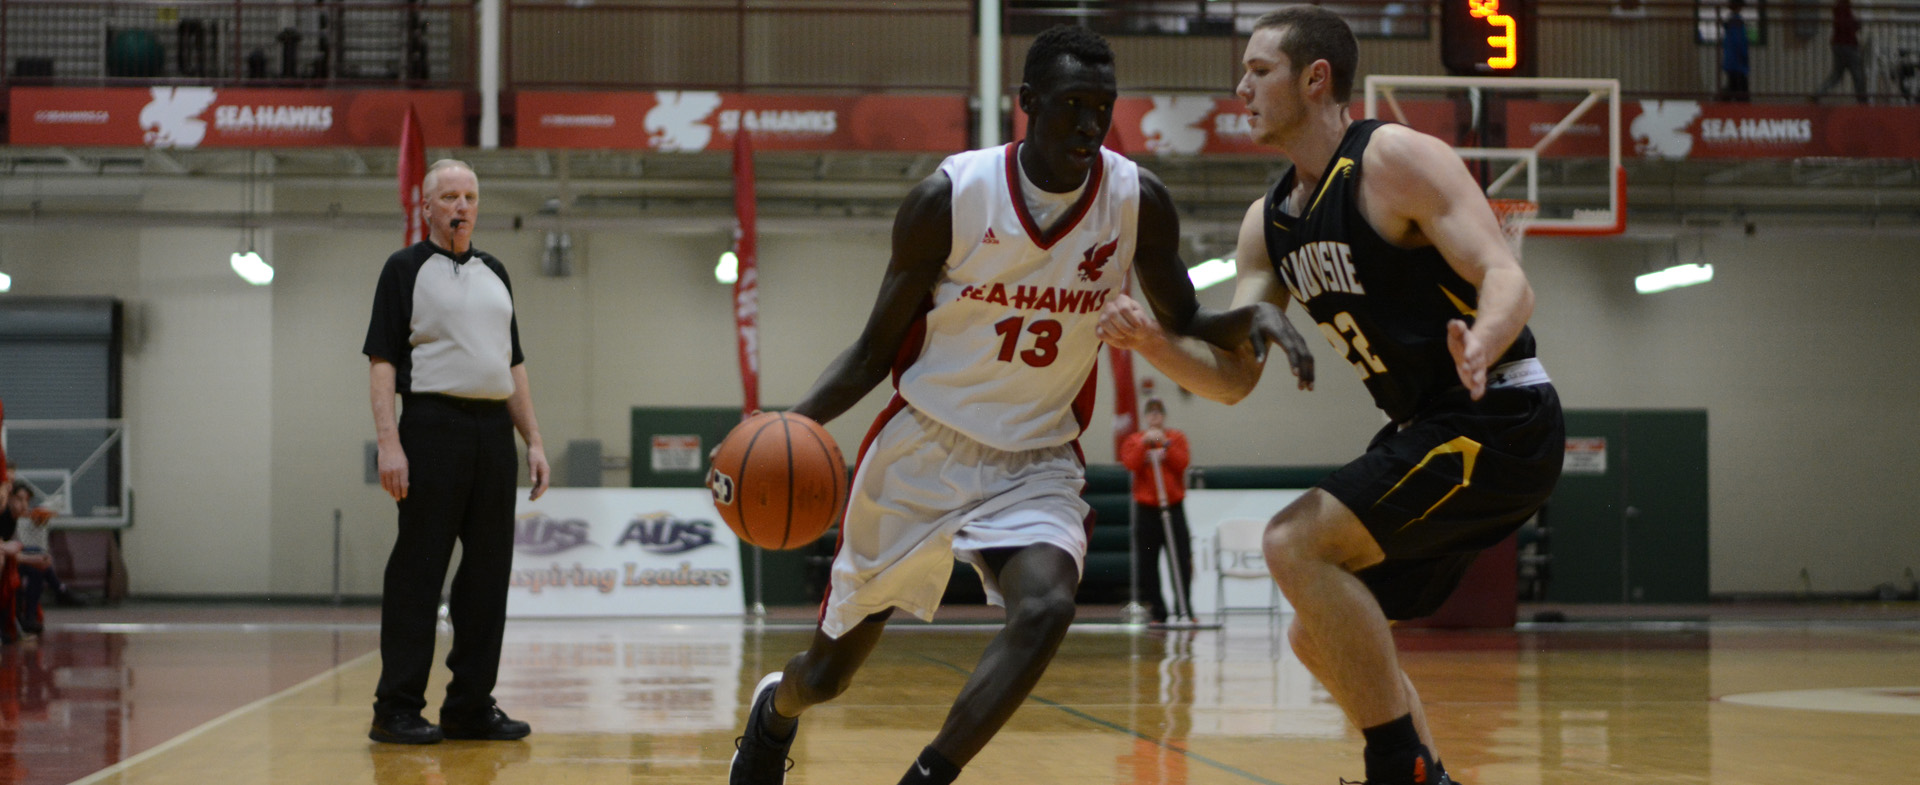 Sea-Hawks Get Tigers to Open Playoffs